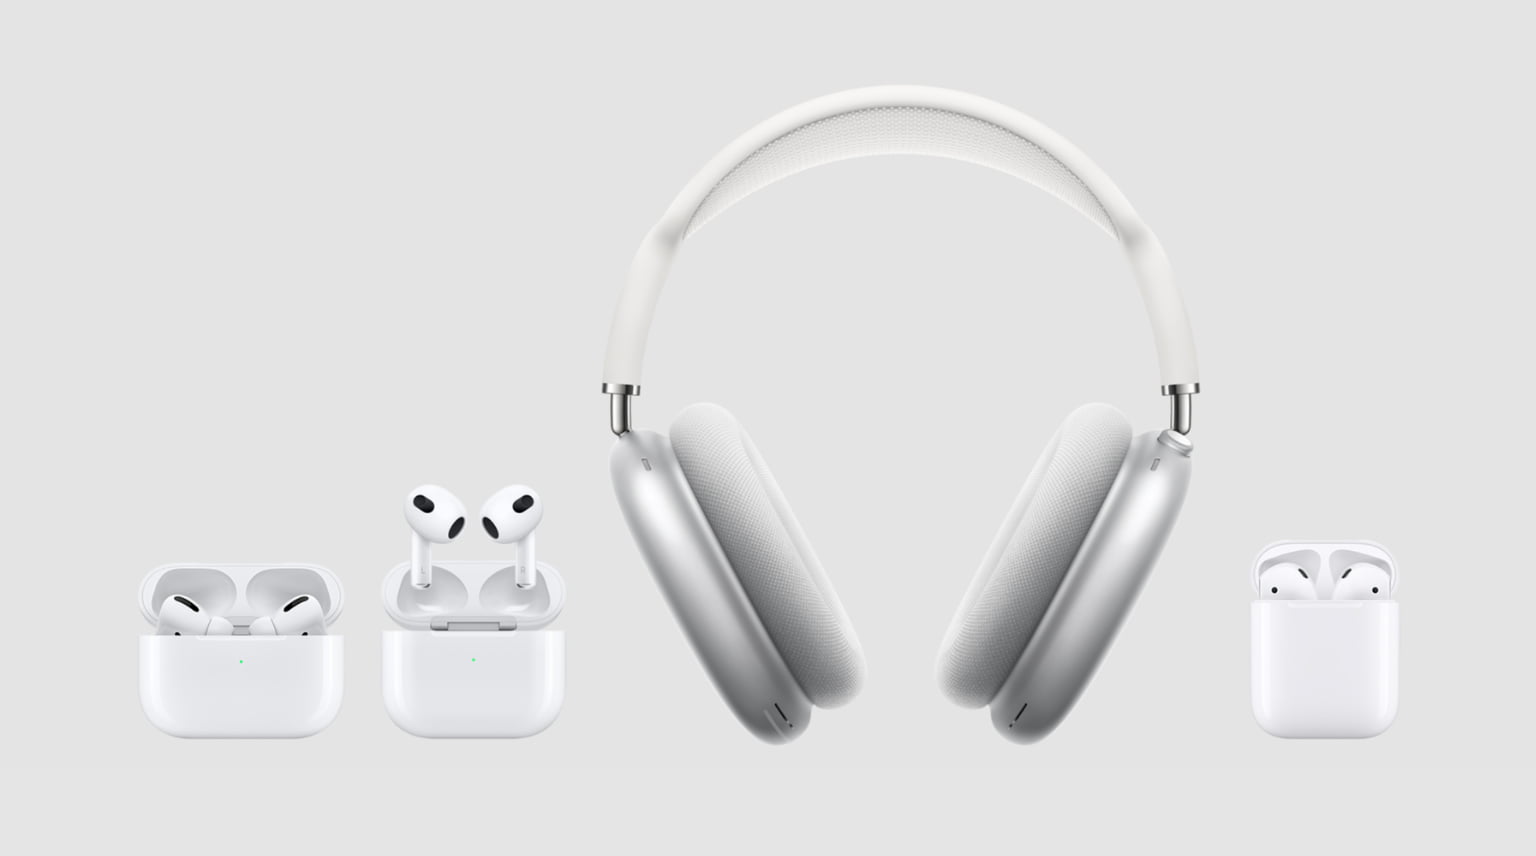 AirPods, AirPods Pro, AirPods 3rd generation, and AirPods Max